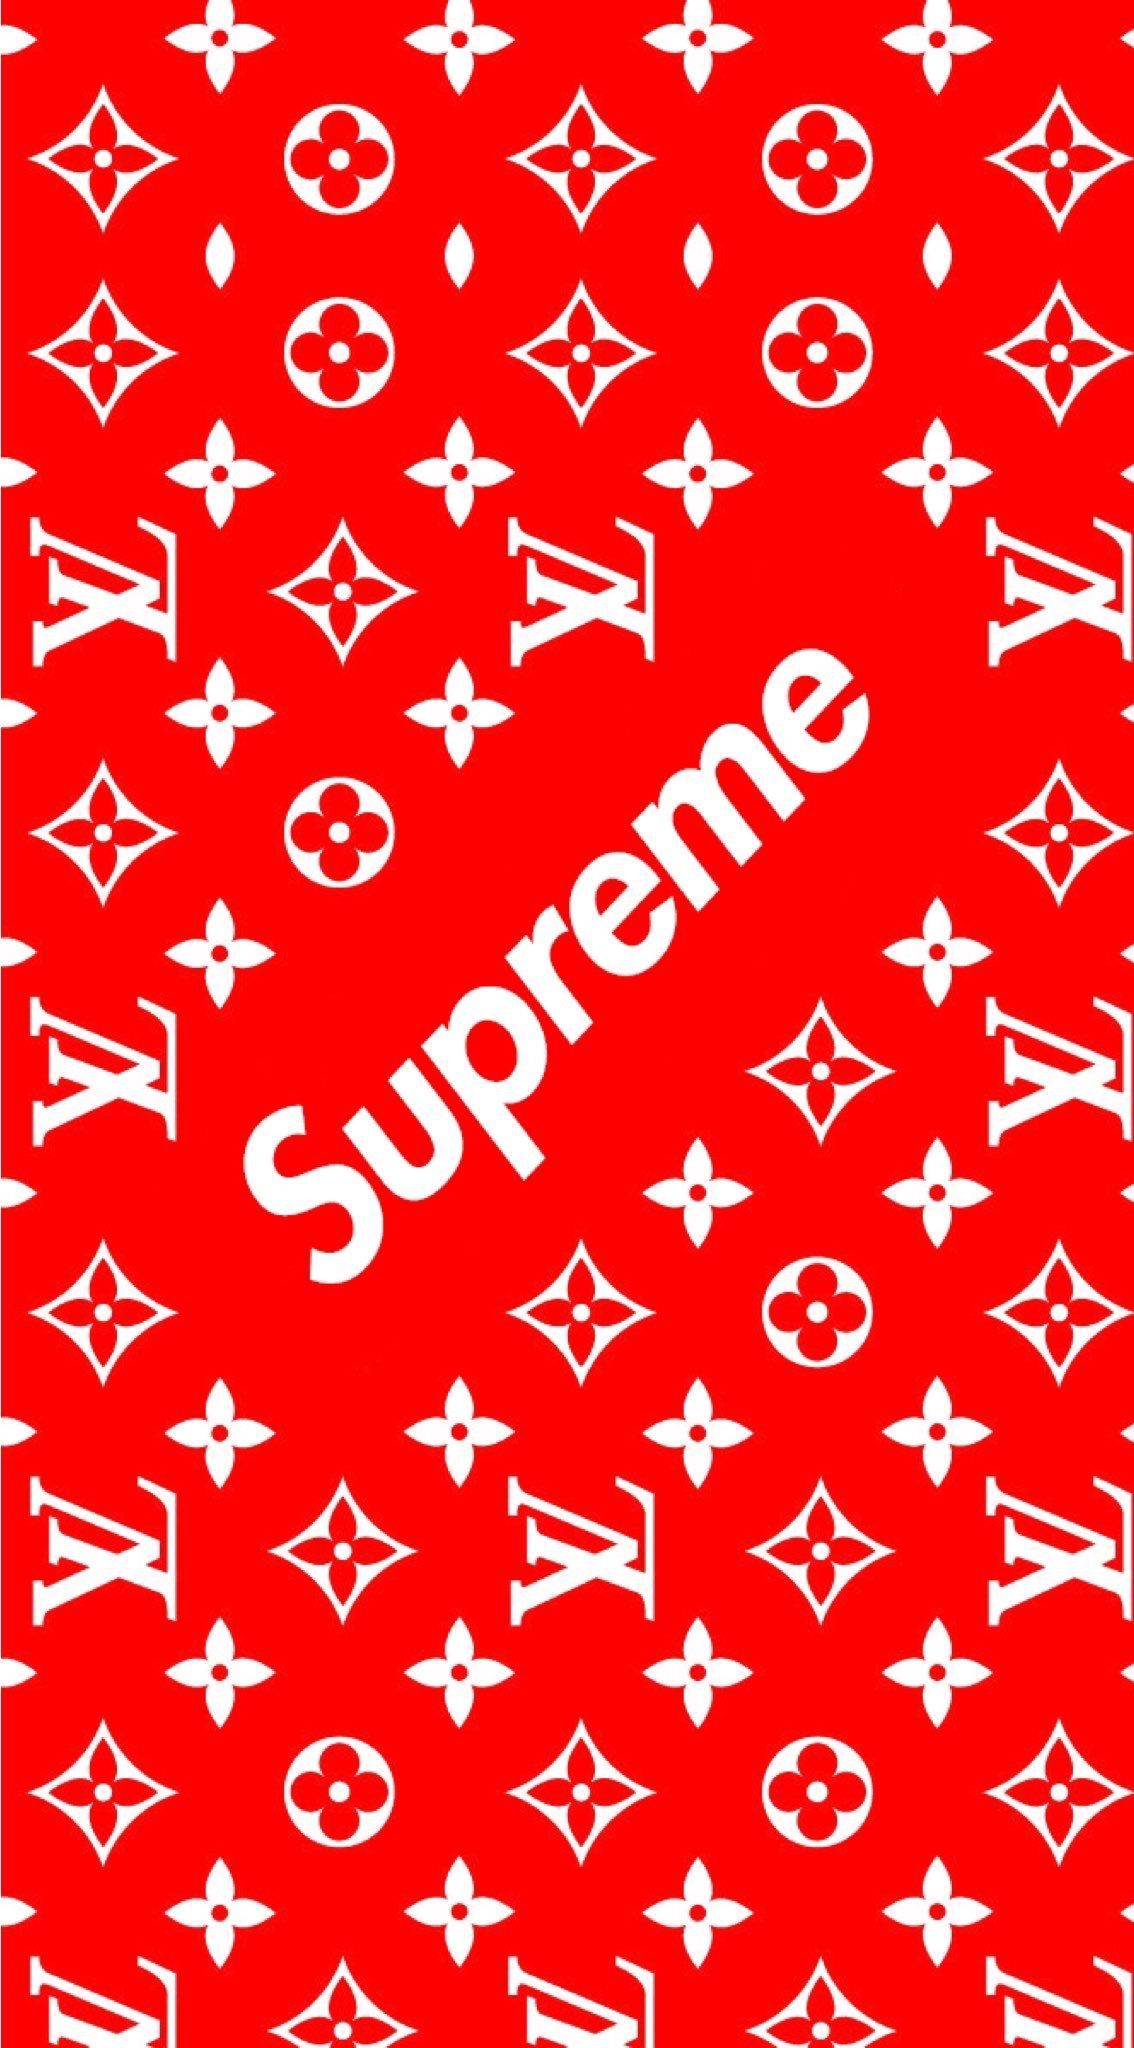 Supreme Live Wallpaper Girl.GiftWatches.CO